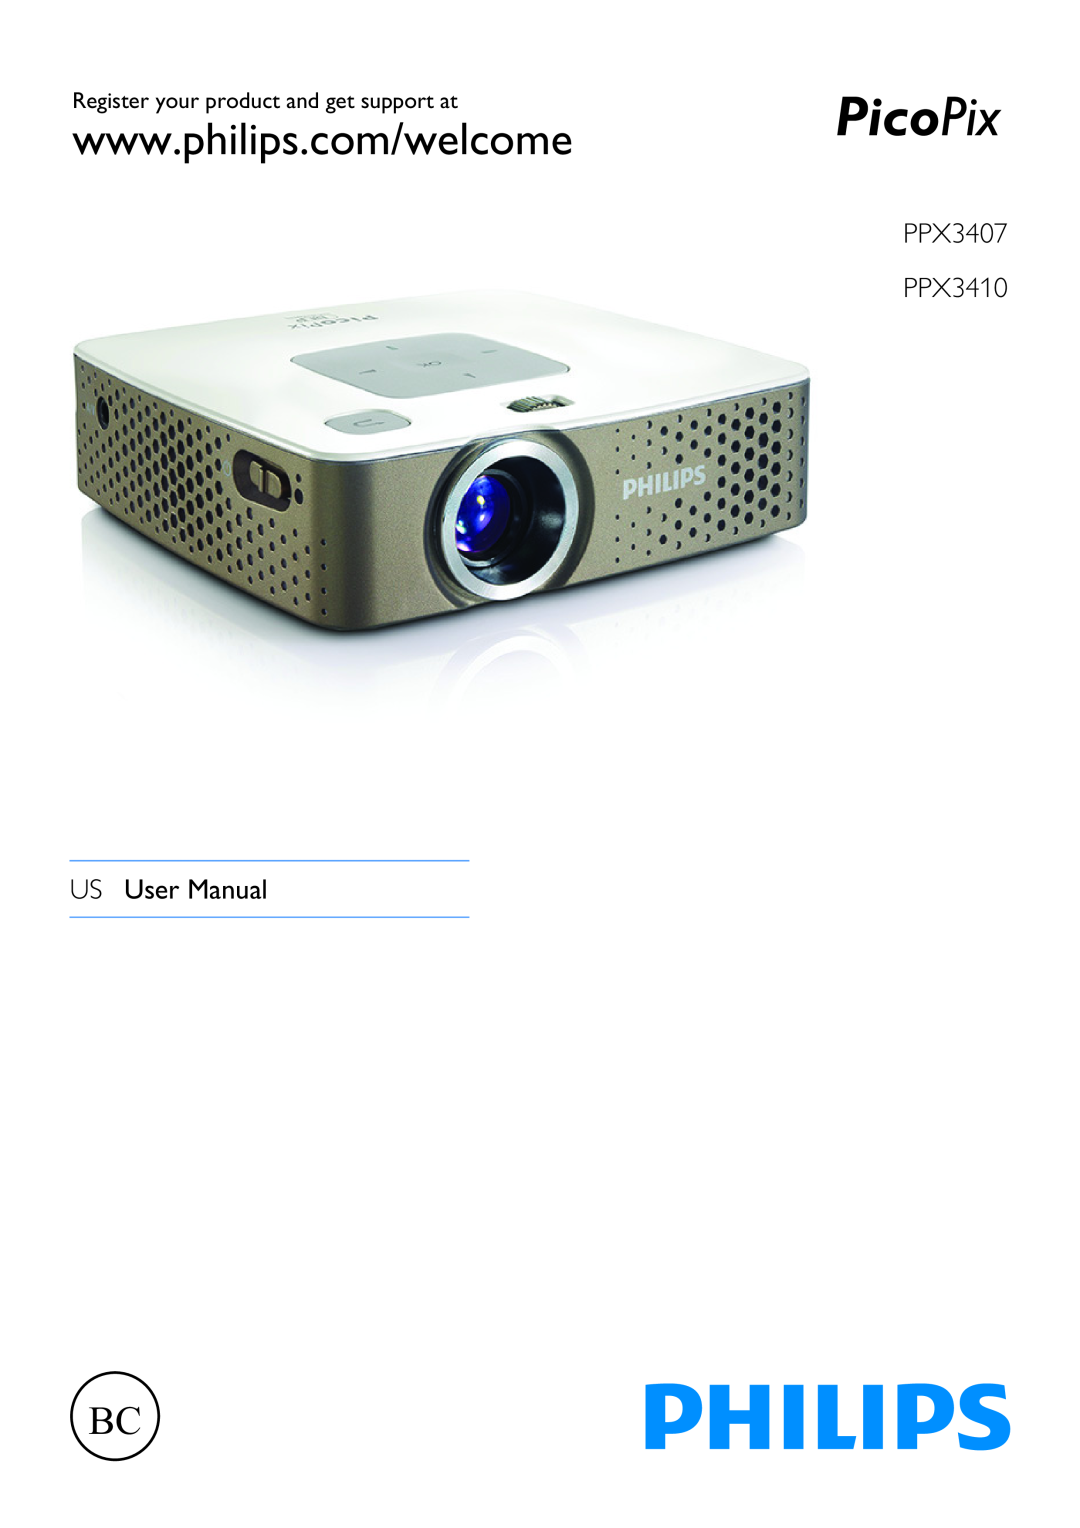 Philips user manual PPX3407 PPX3410 US User Manual, Register your product and get support at 